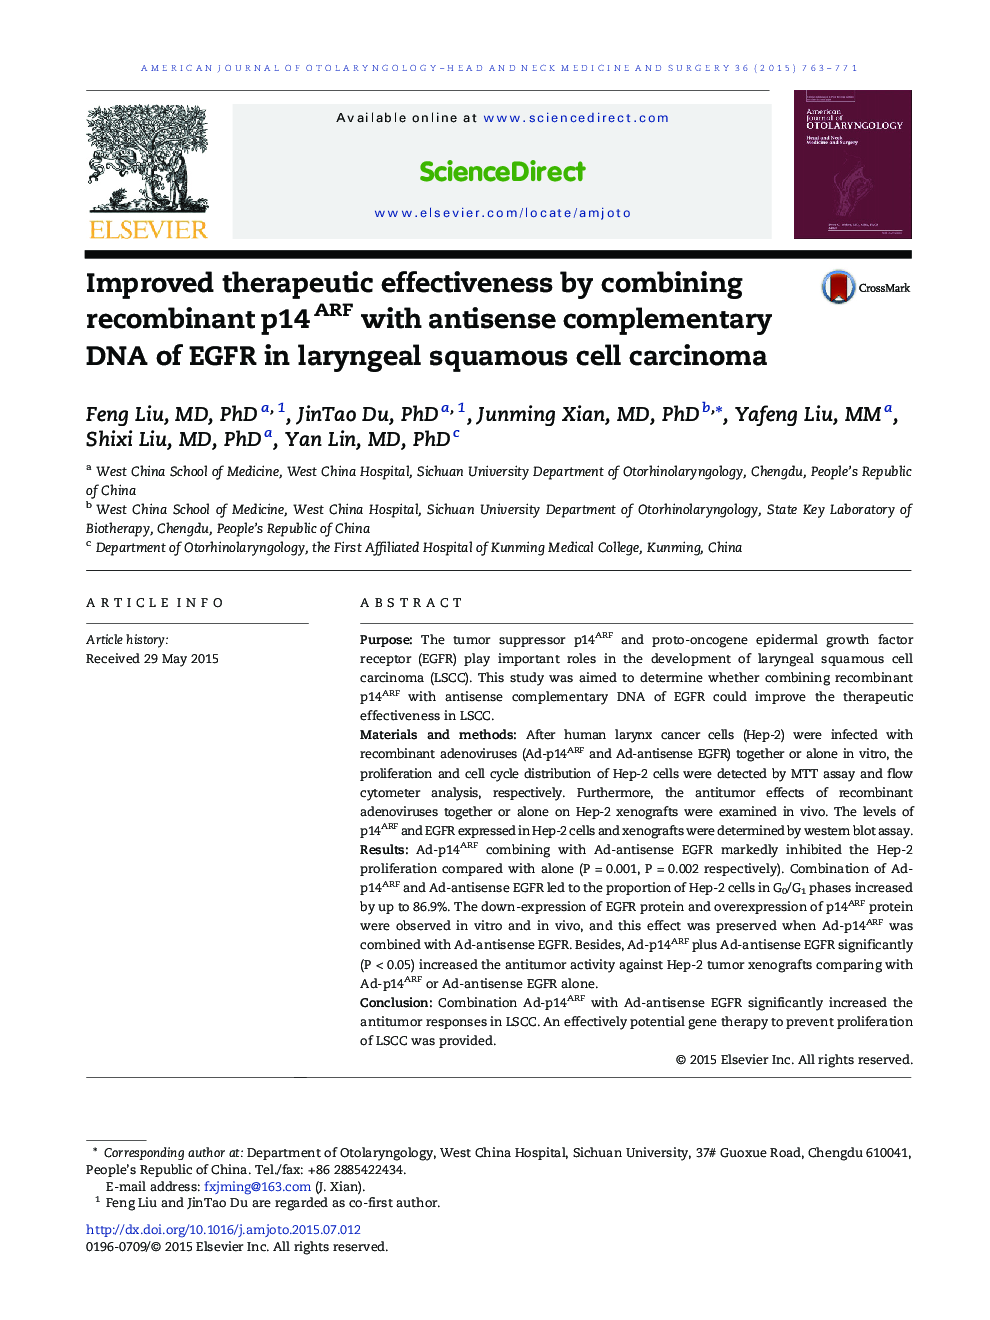 Improved therapeutic effectiveness by combining recombinant p14ARF with antisense complementary DNA of EGFR in laryngeal squamous cell carcinoma